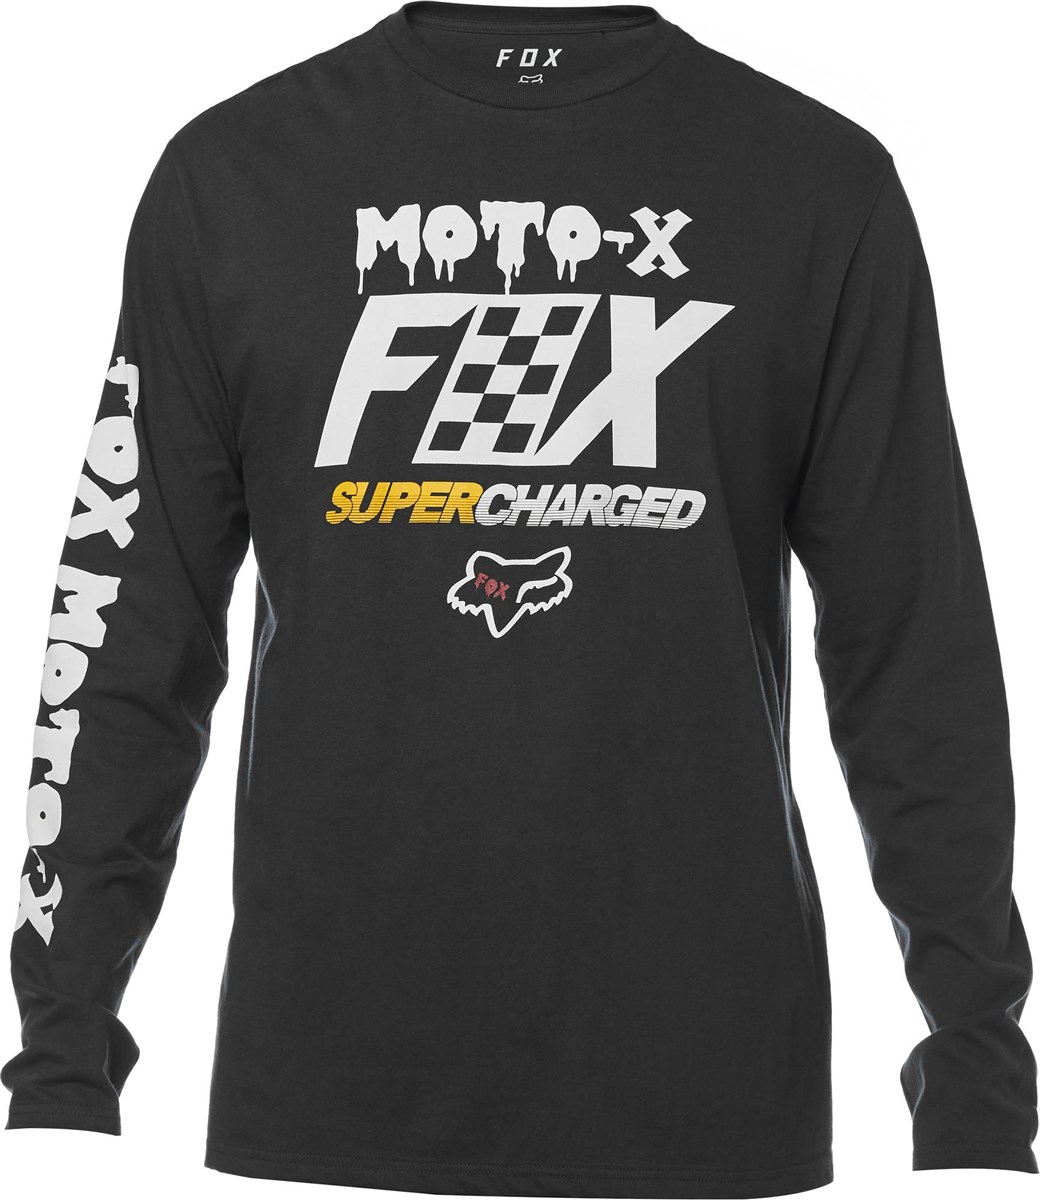 Fox Clothing Charged Long Sleeve Tee product image